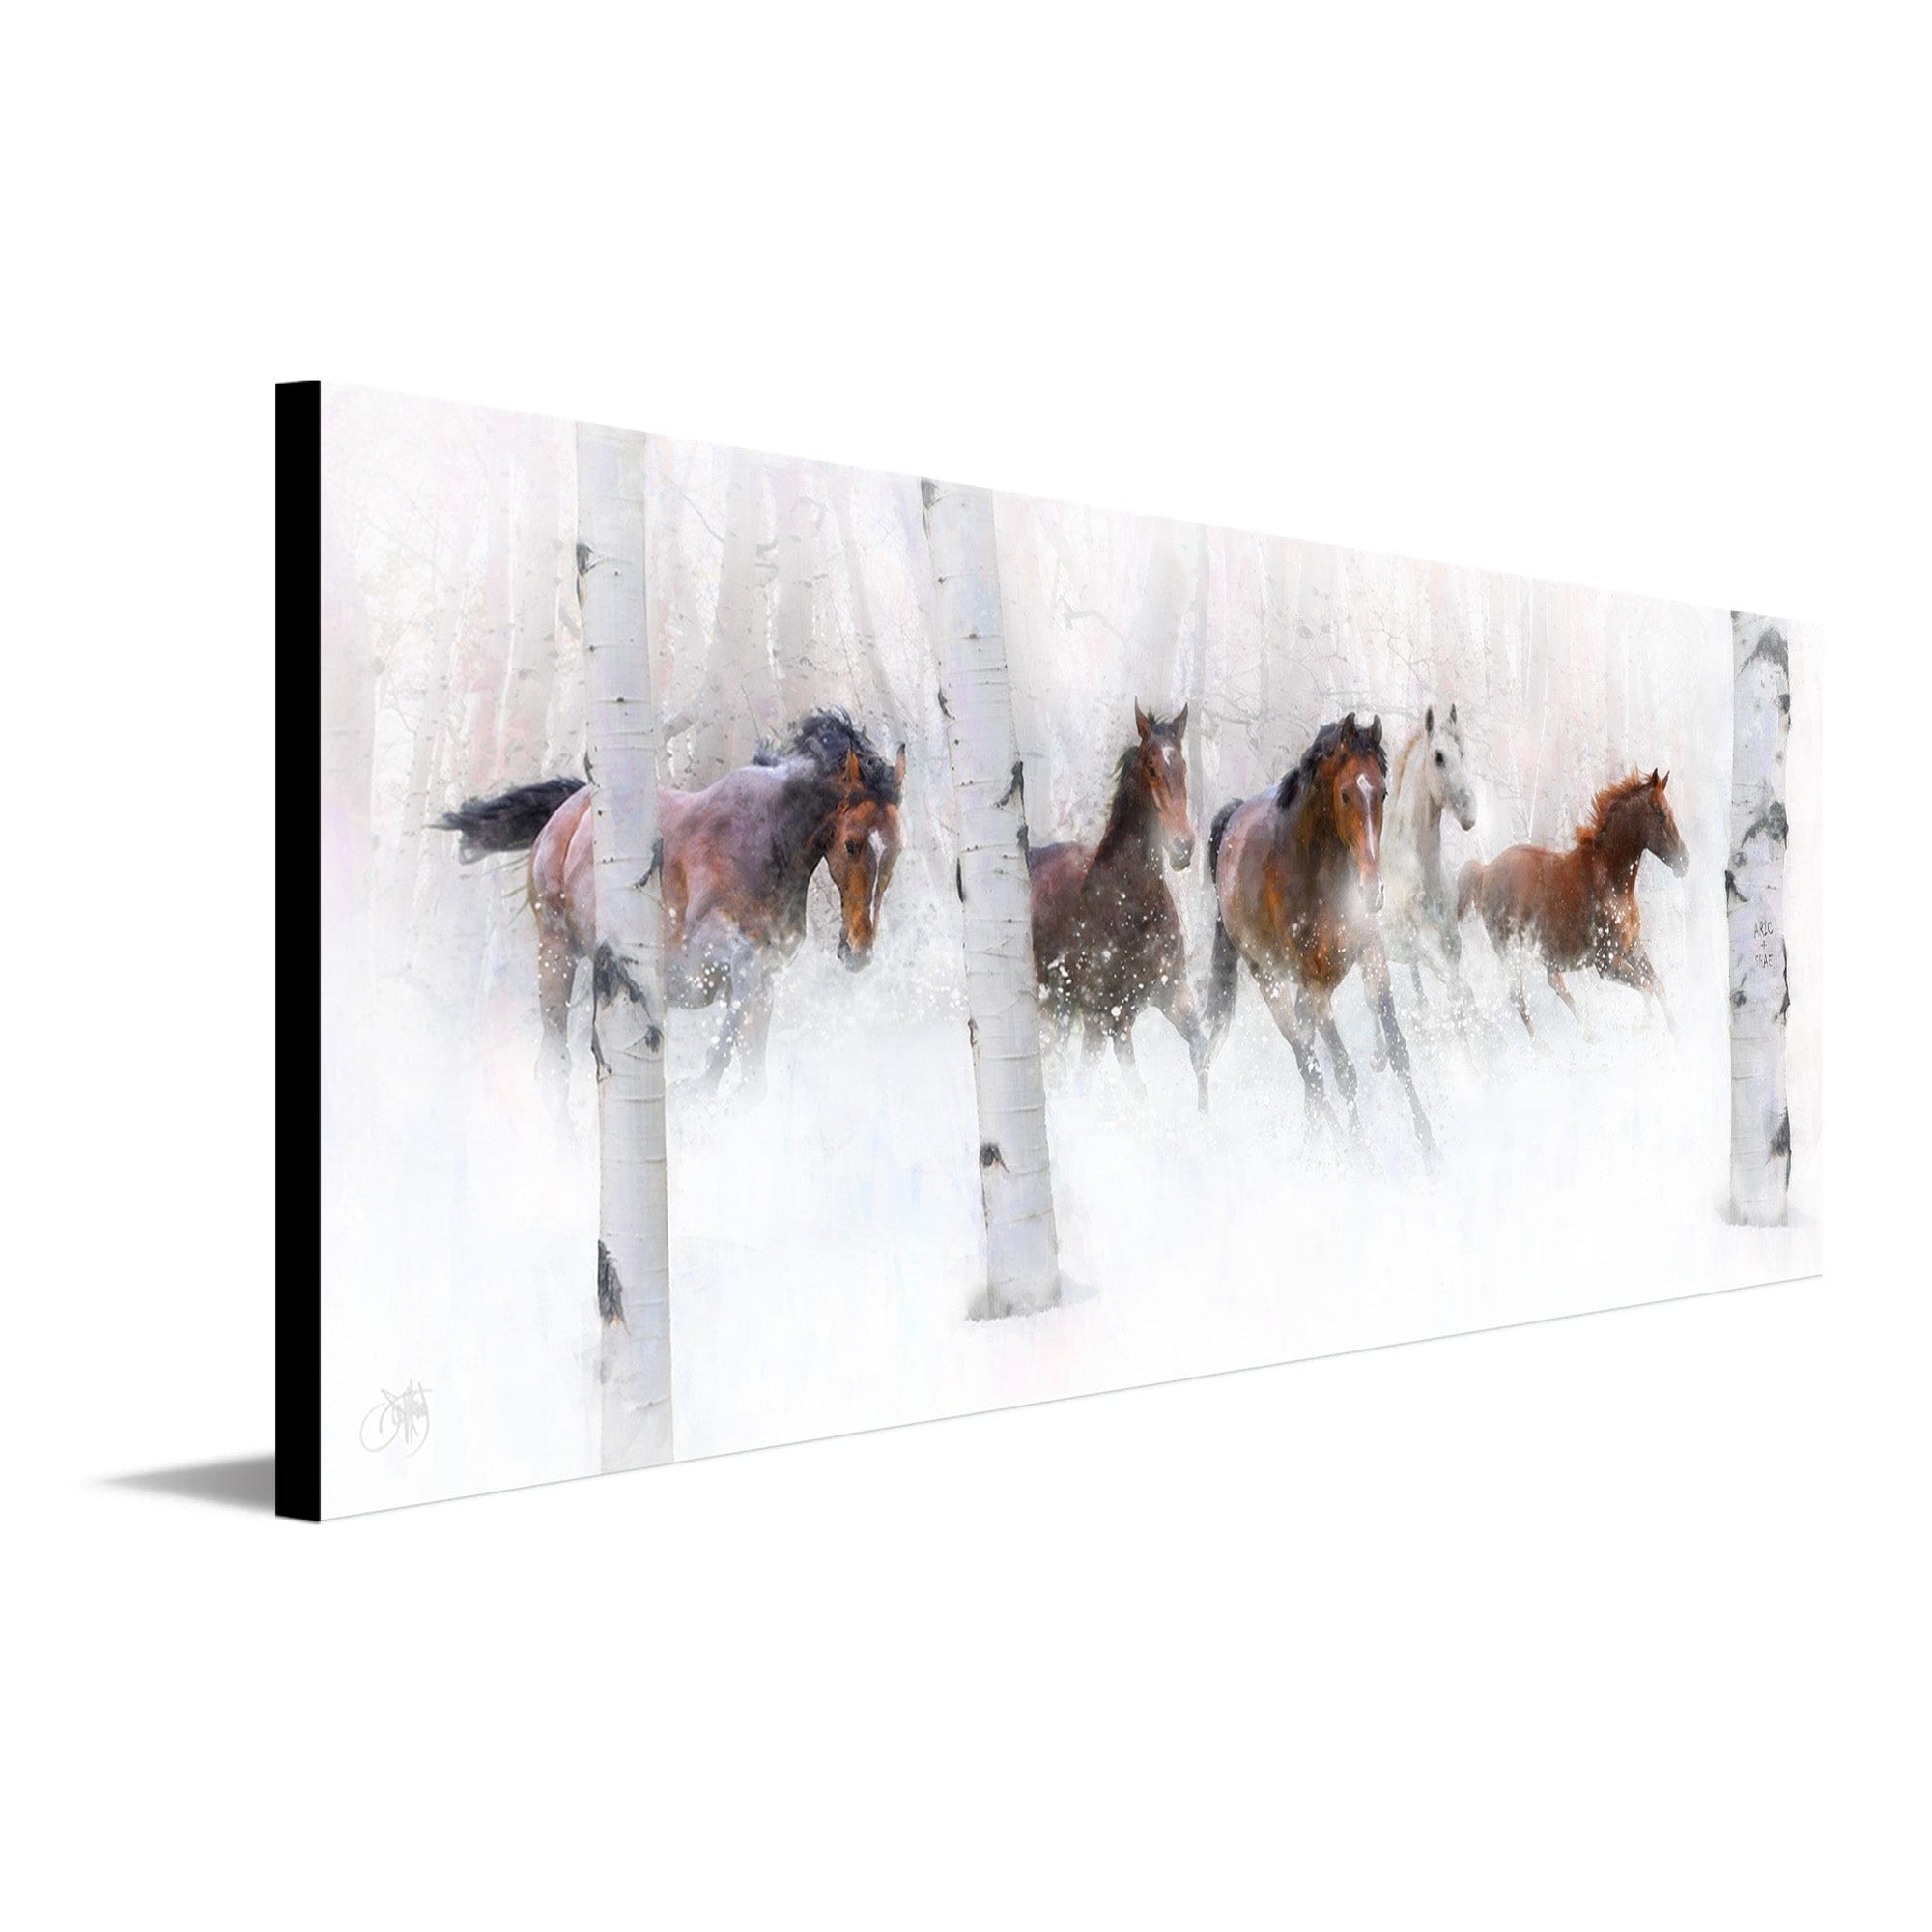 Personalized western decor art print of horses running through a snowy grove of aspen trees- Mounted to Wood Block